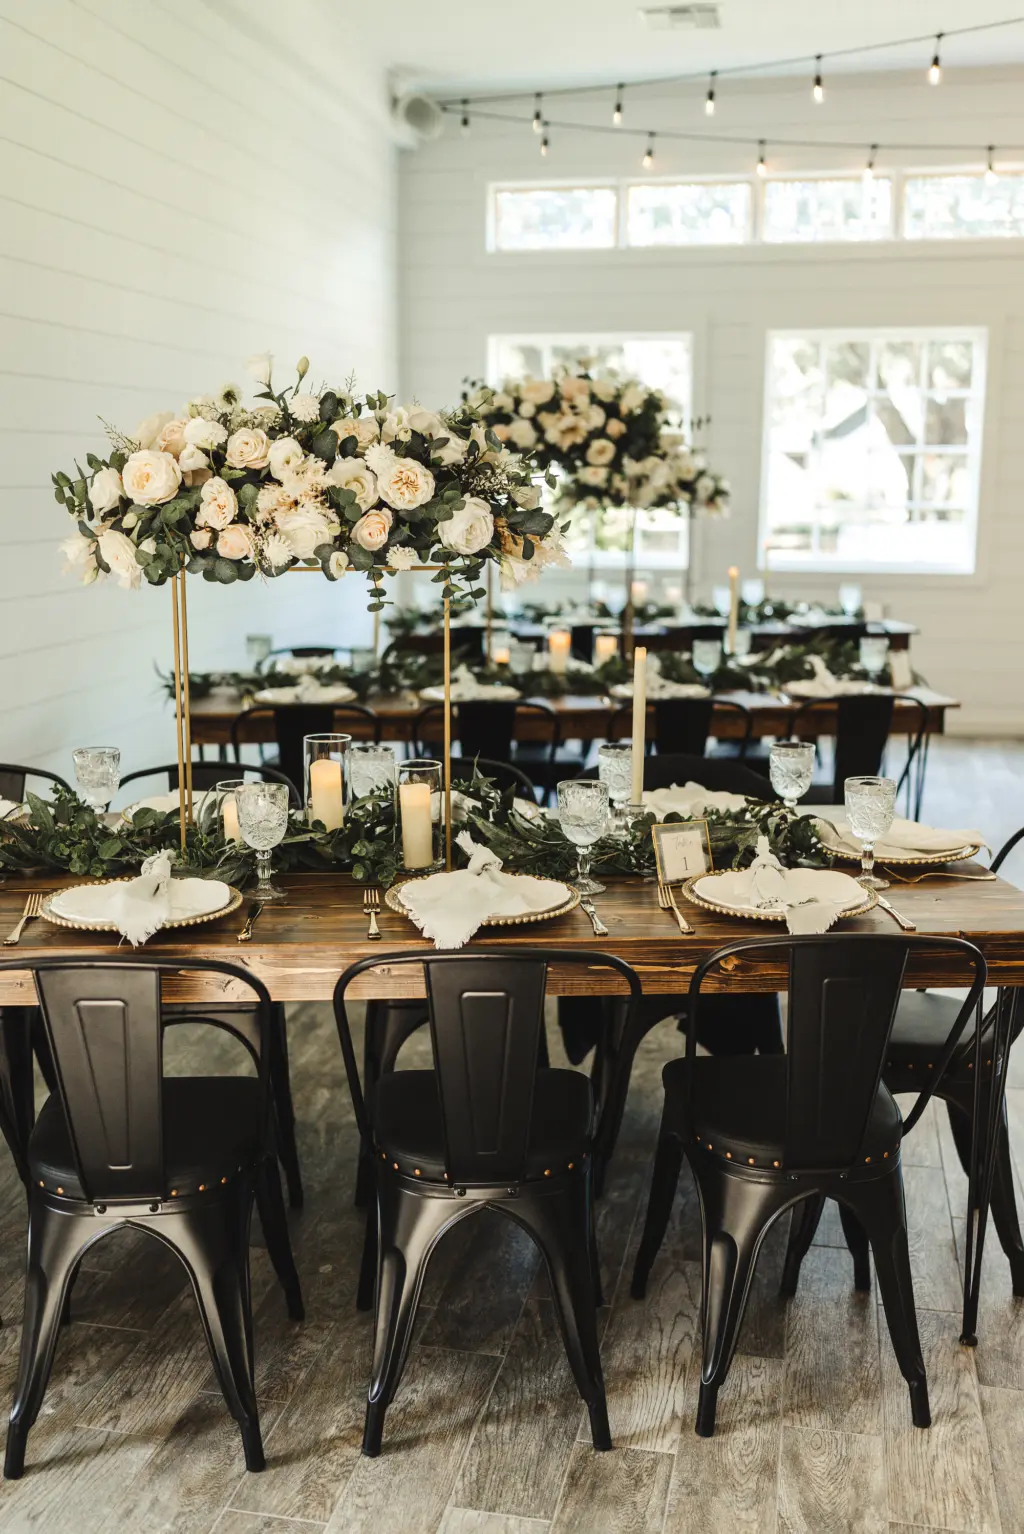 Modern and Rustic Indoor Wedding Reception | Tall Flower Stand Centerpieces with White Roses and Greenery | Tampa Bay Florist Monarch Events and Design